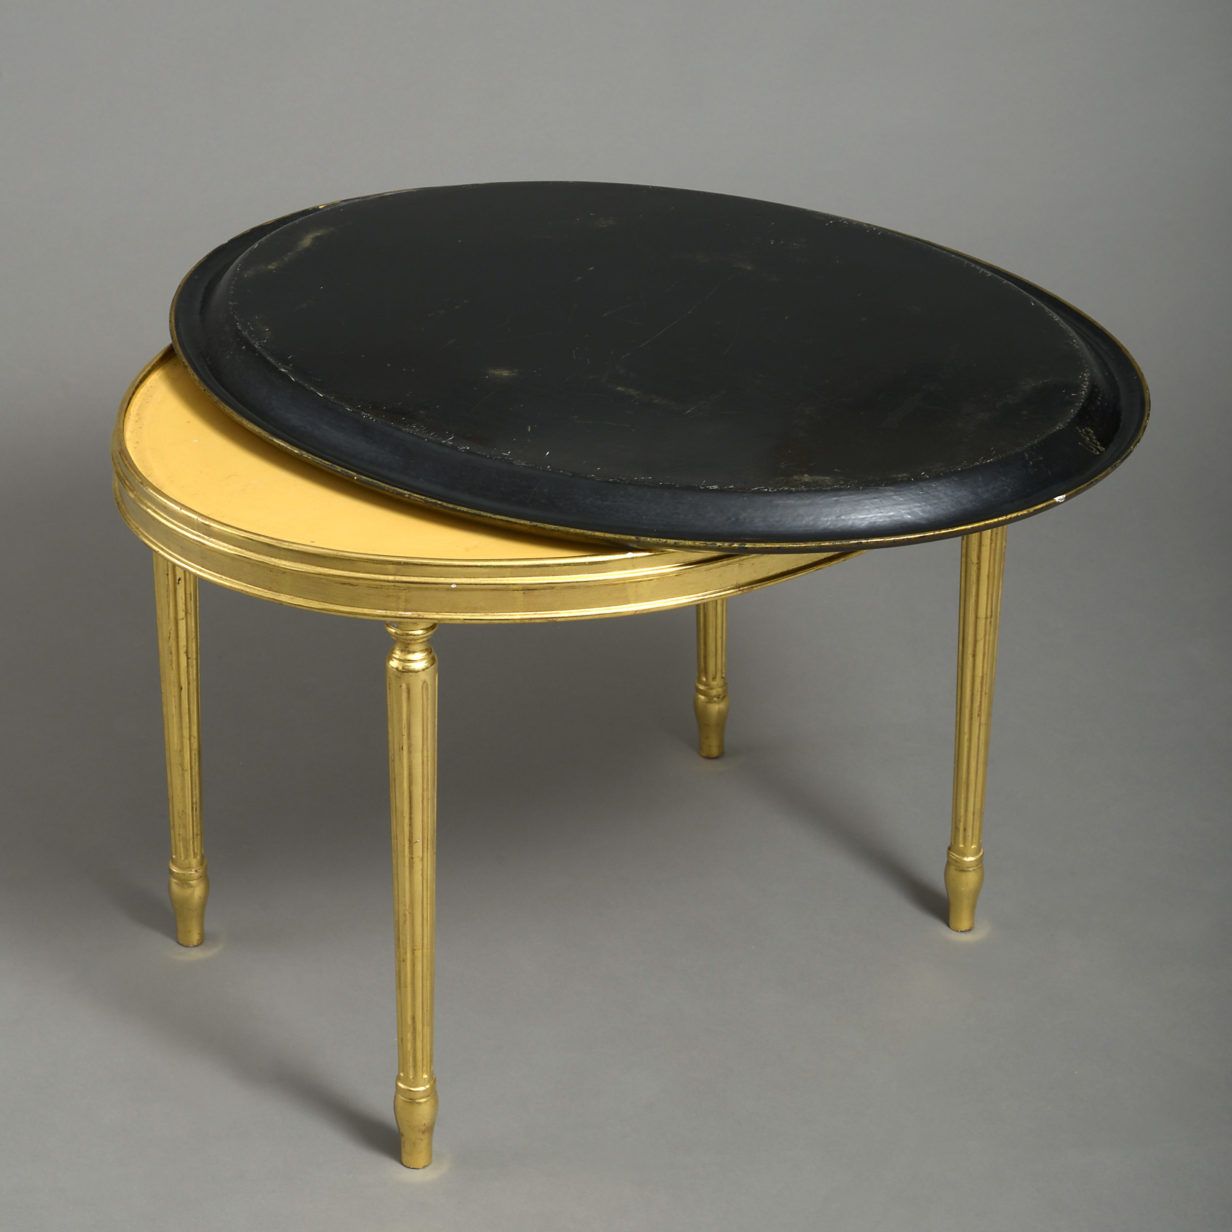 An early 19th century regency period papier maché tray table